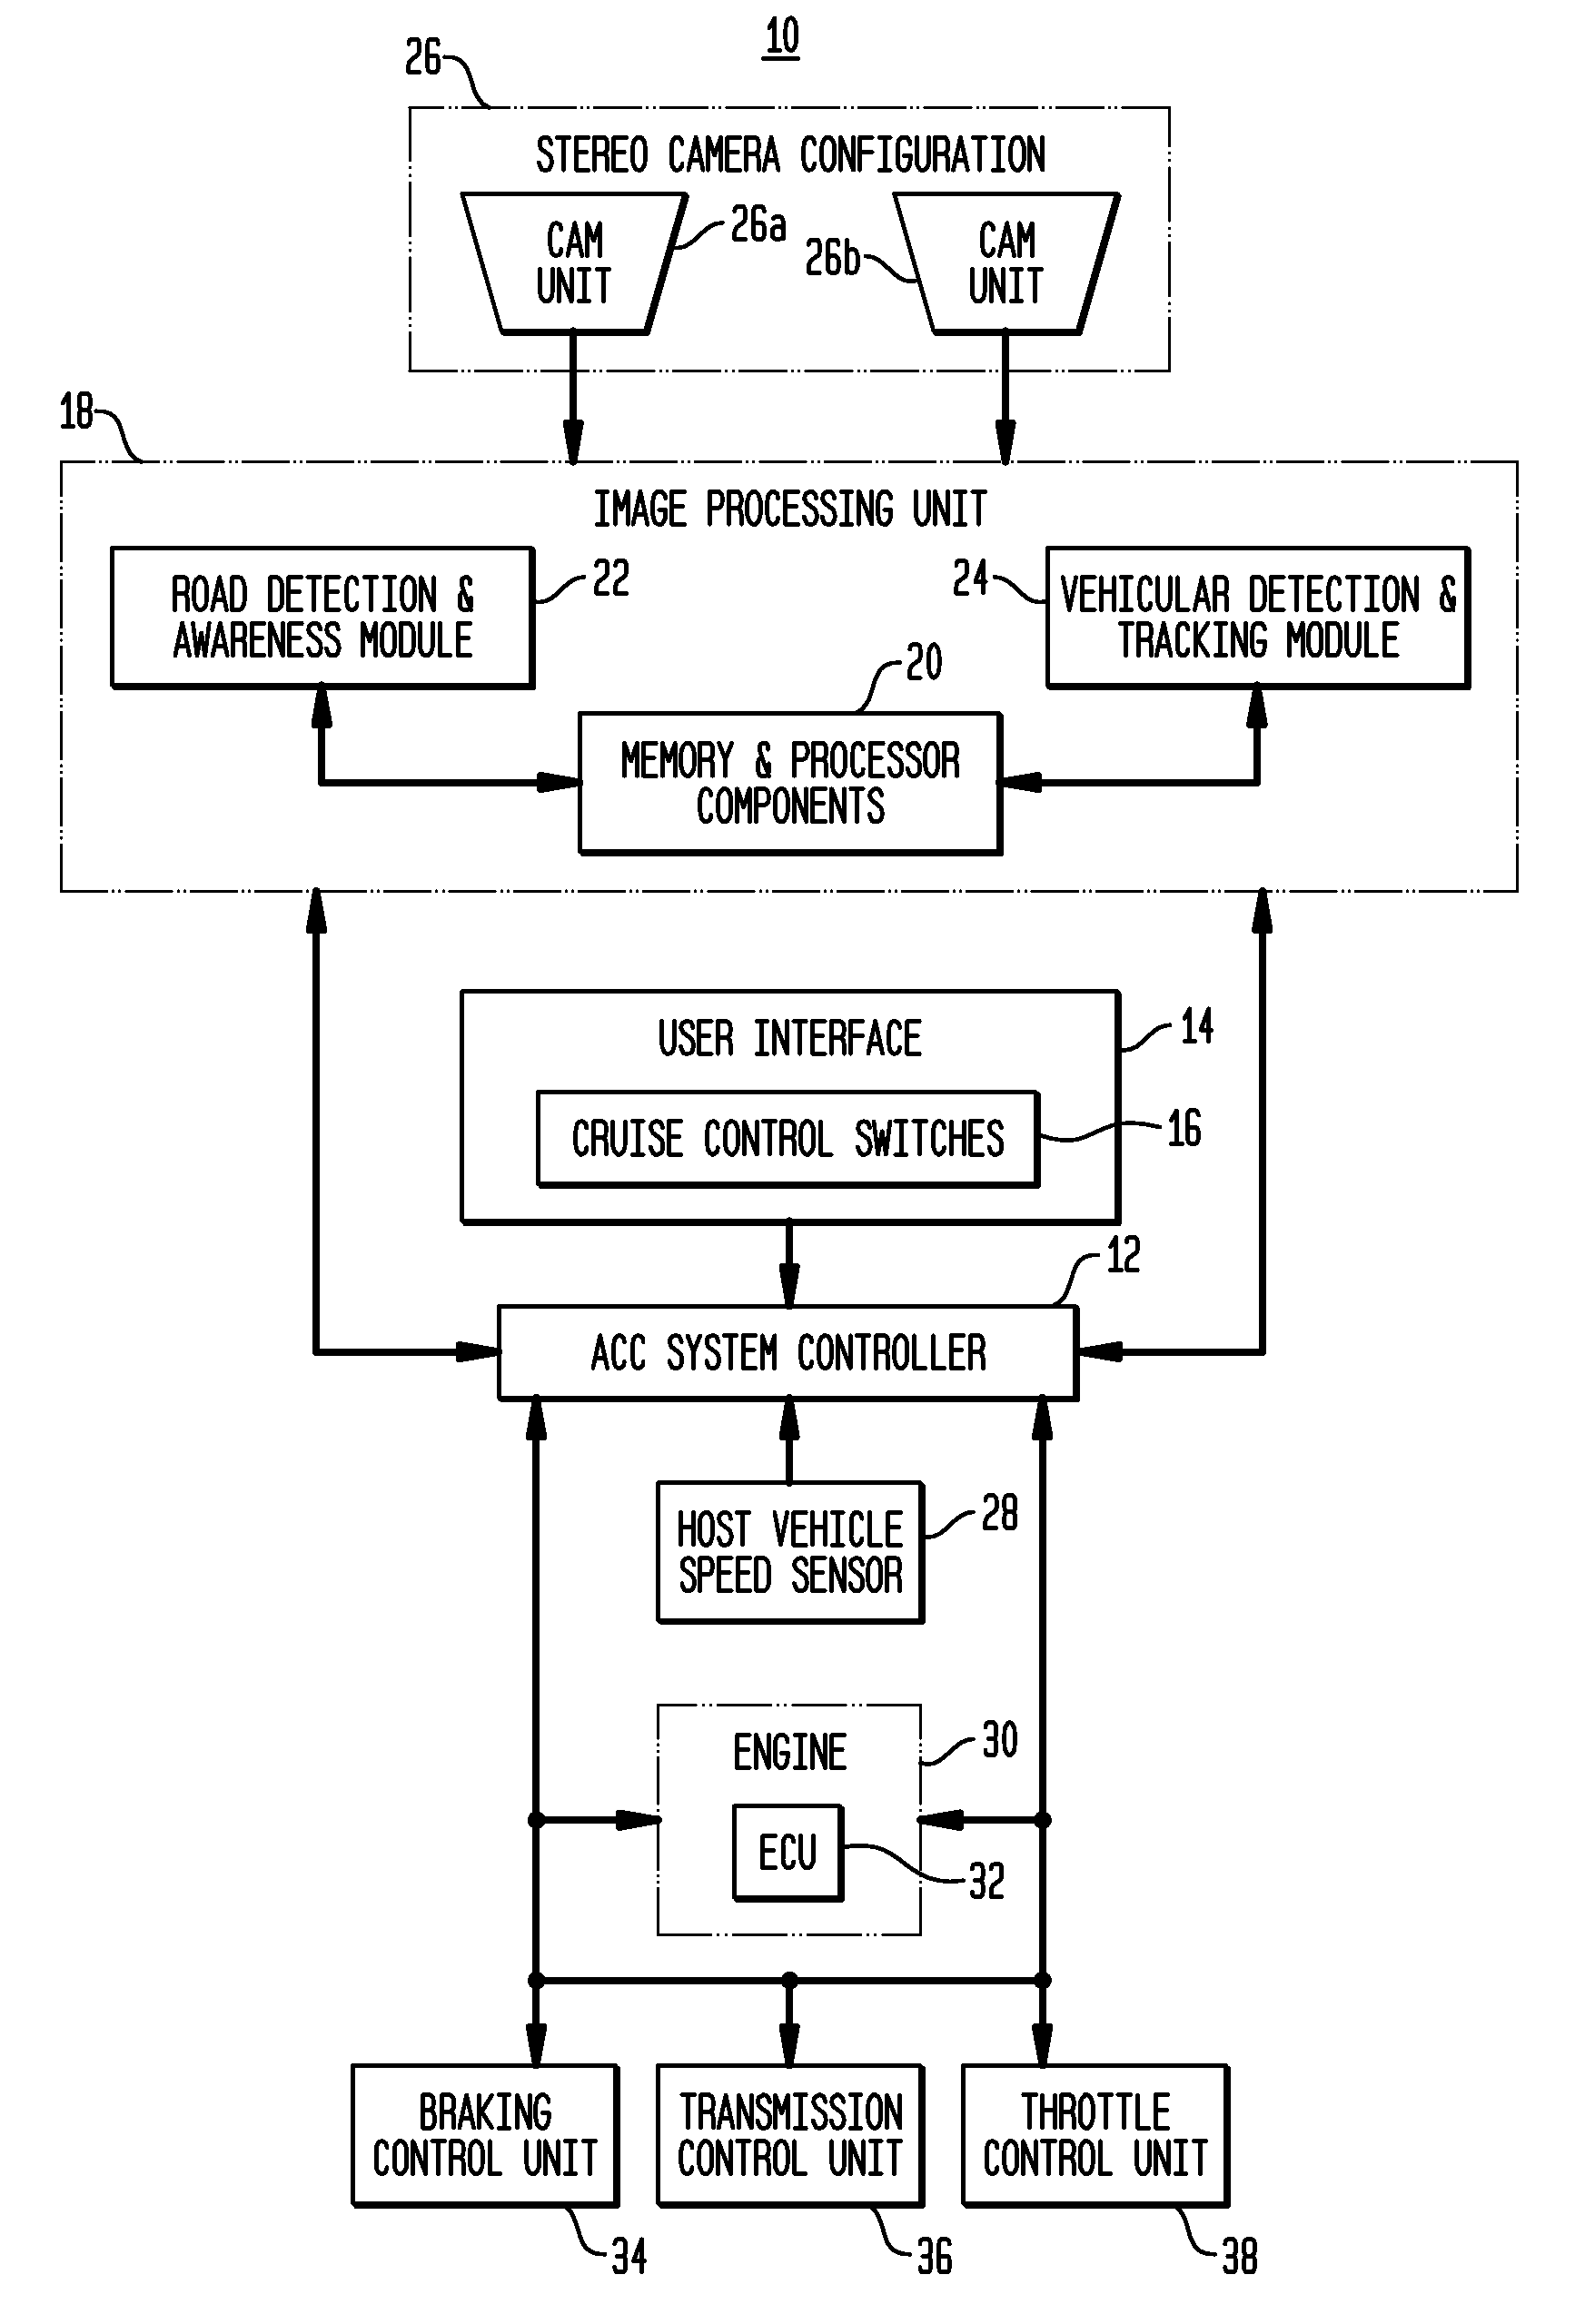 Apparatus and method for object detection and tracking and roadway awareness using stereo cameras